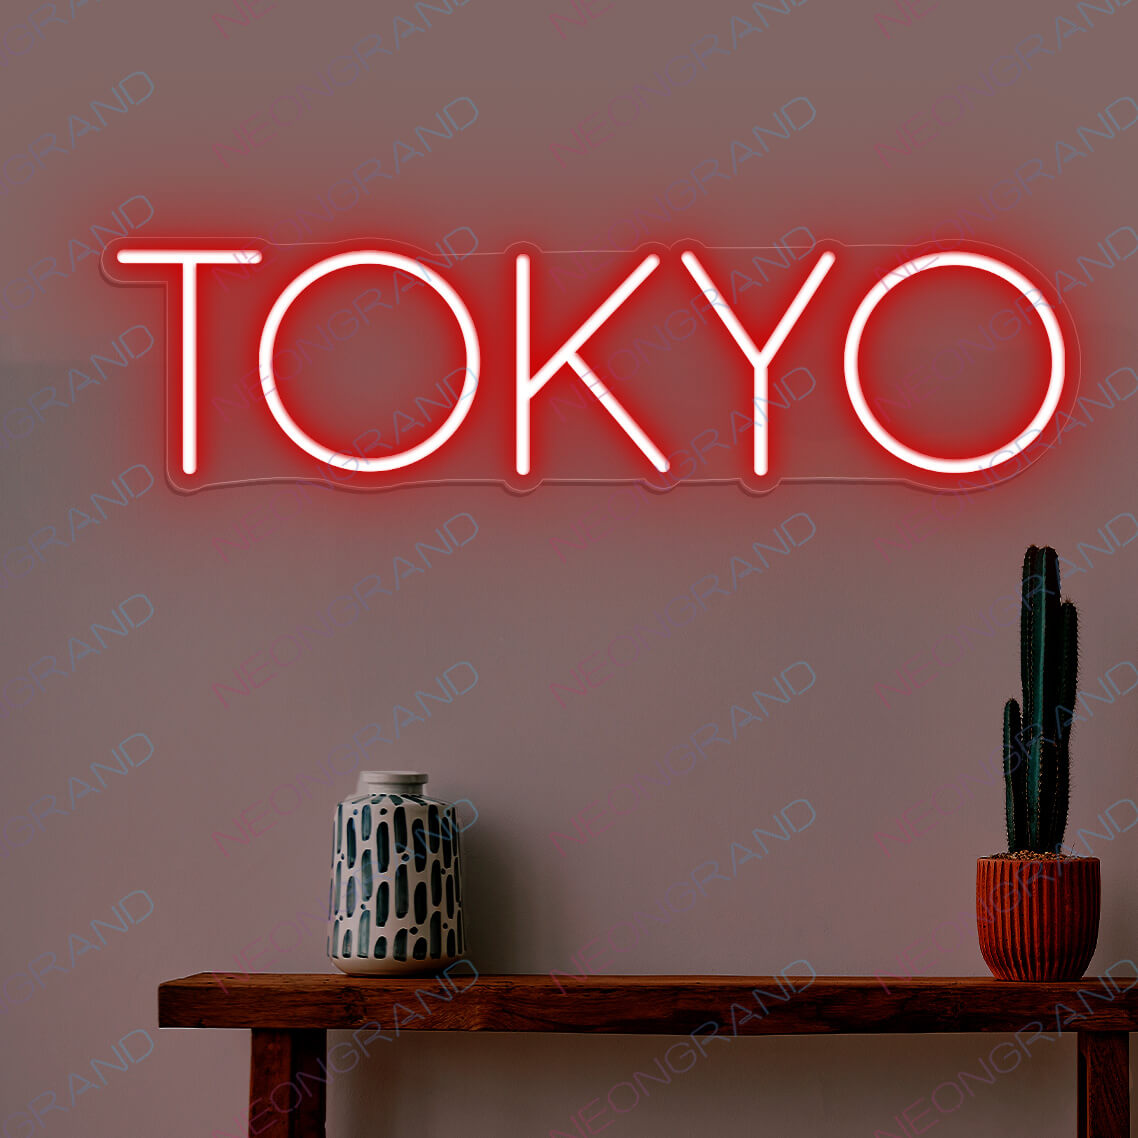 Tokyo Neon Sign Led Light, Japanese Neon Signs red